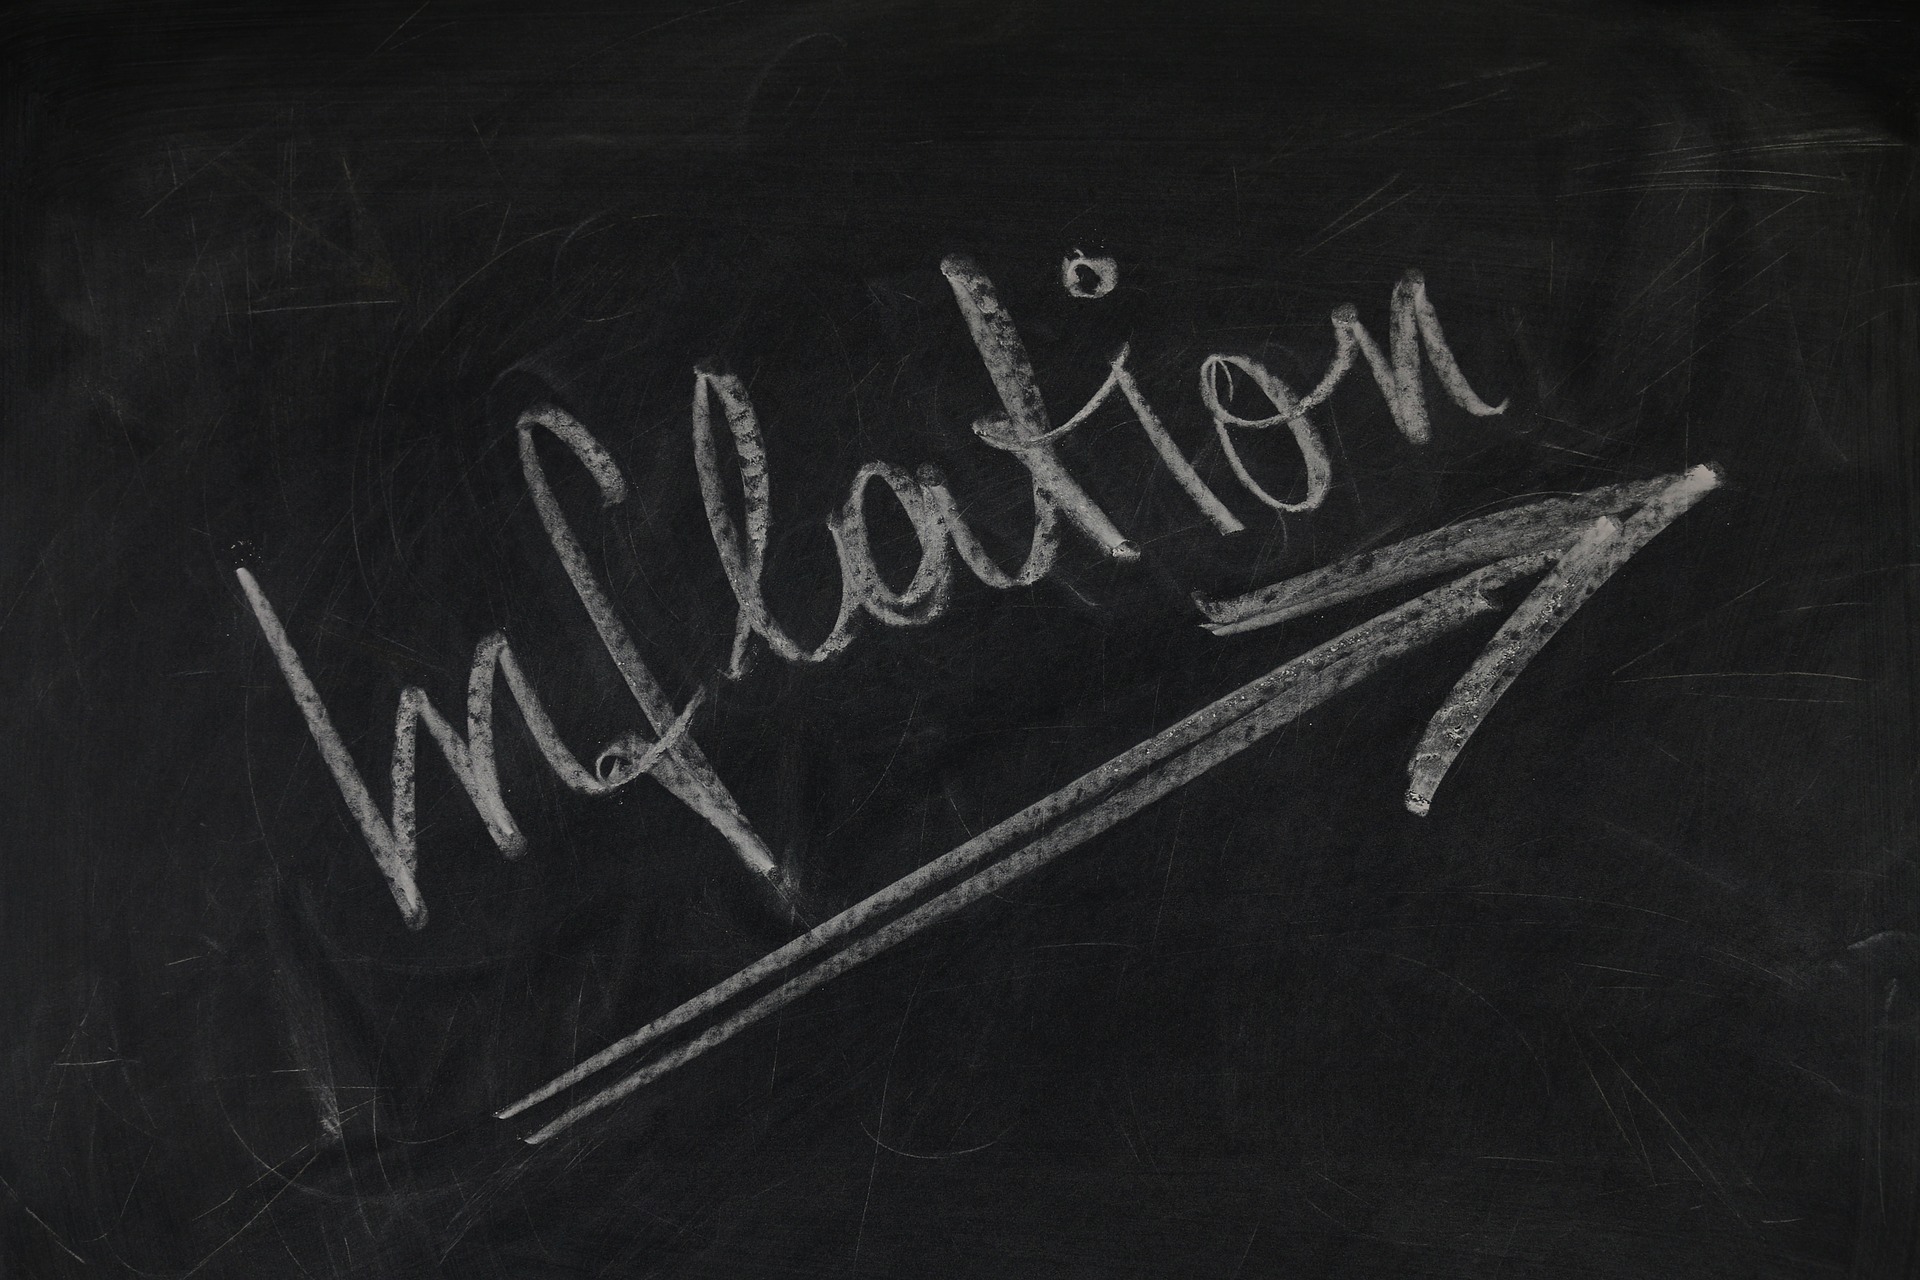 Wall Street Journal reports on inflation… again